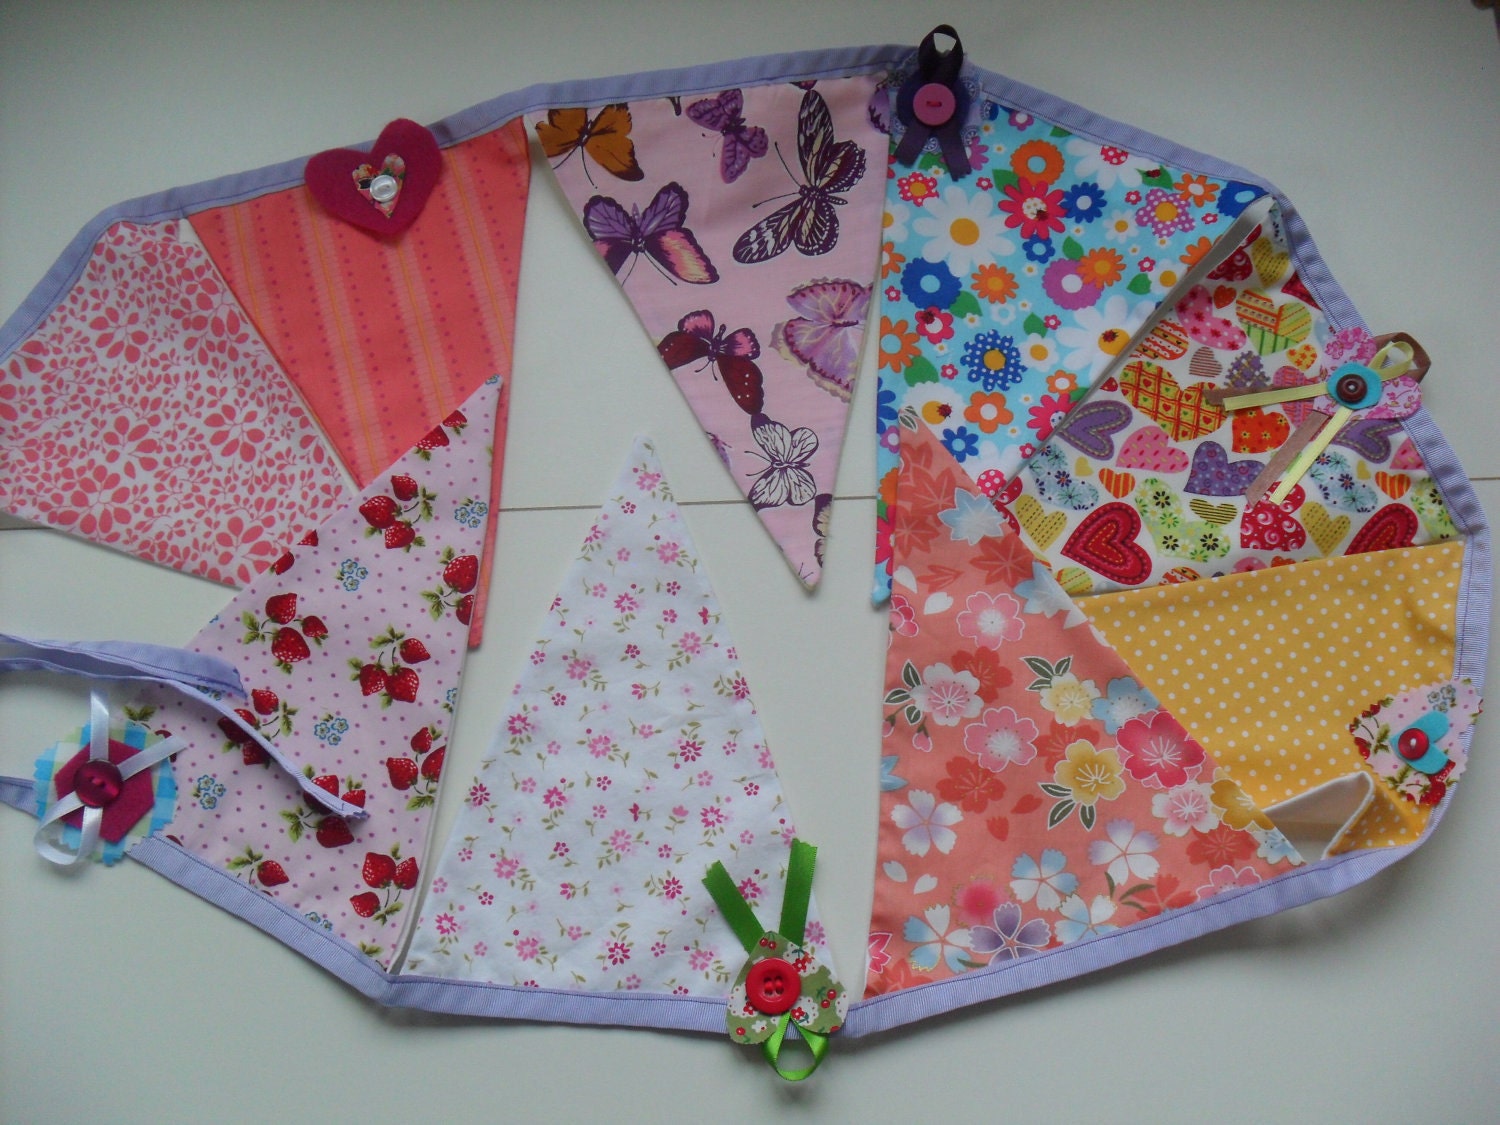 Bunting for Girls, Handmade, very pretty, wonderful in a girl's room or for birthdays/occasions